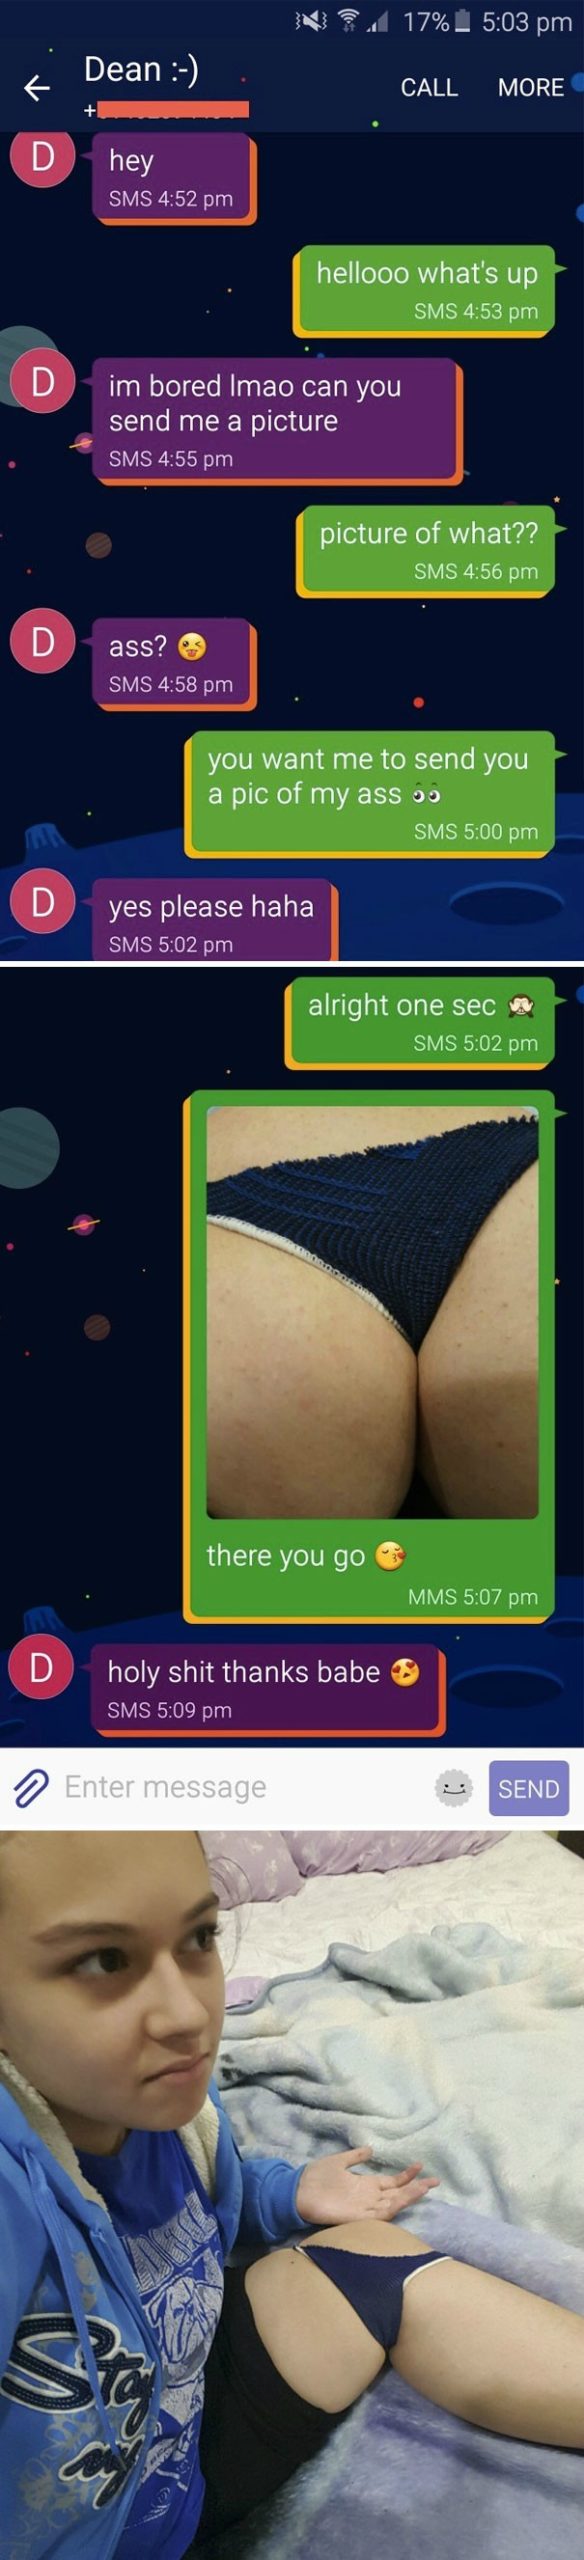 Funny women comebacks sexting dealing with creeps 110 59a956bc4dc39__605.jpg